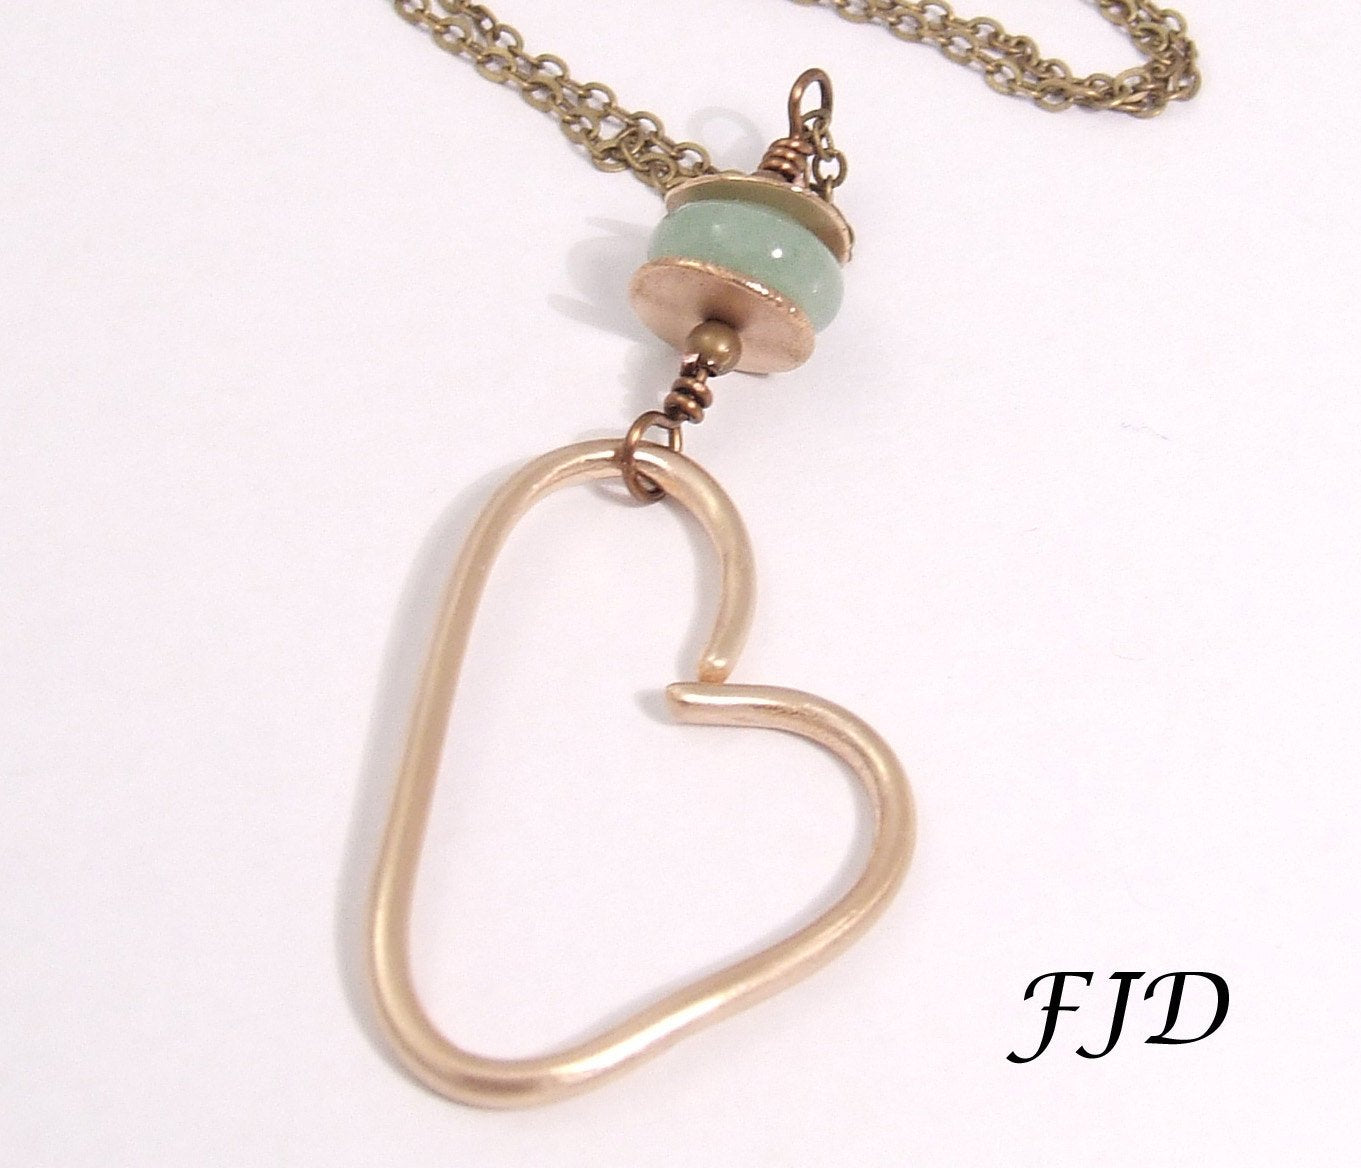 Aspen -  Hand formed Bronze Heart Charm Necklace